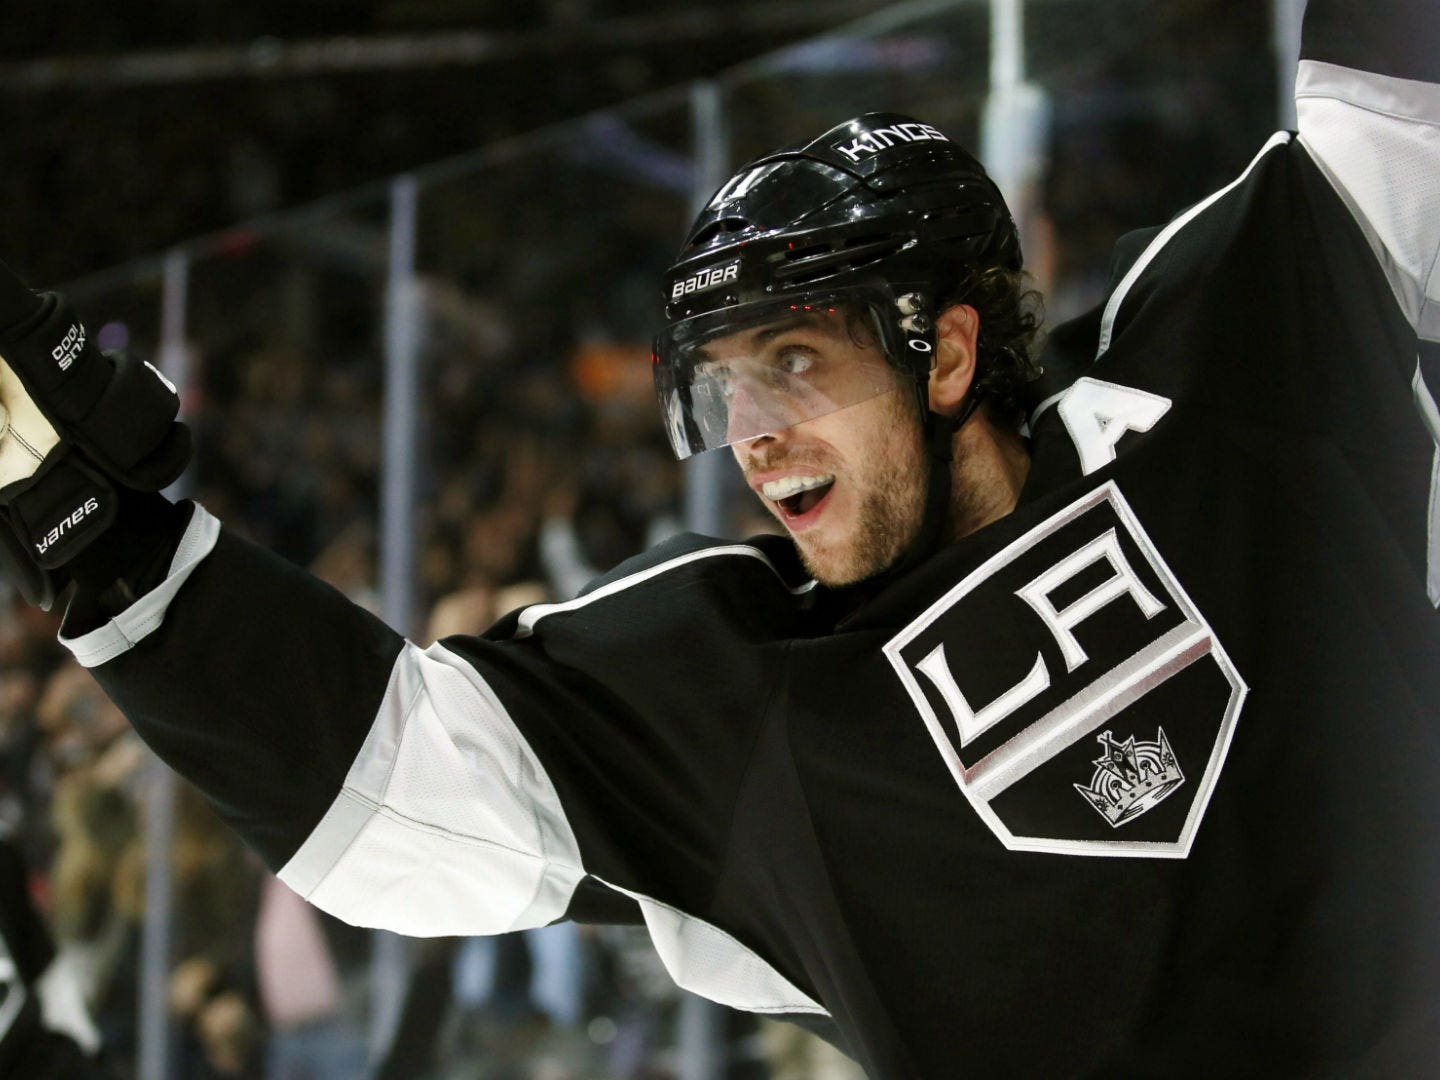 Main image for event titled Los Angeles Kings vs. Colorado Avalanche (SEASON OPENER)